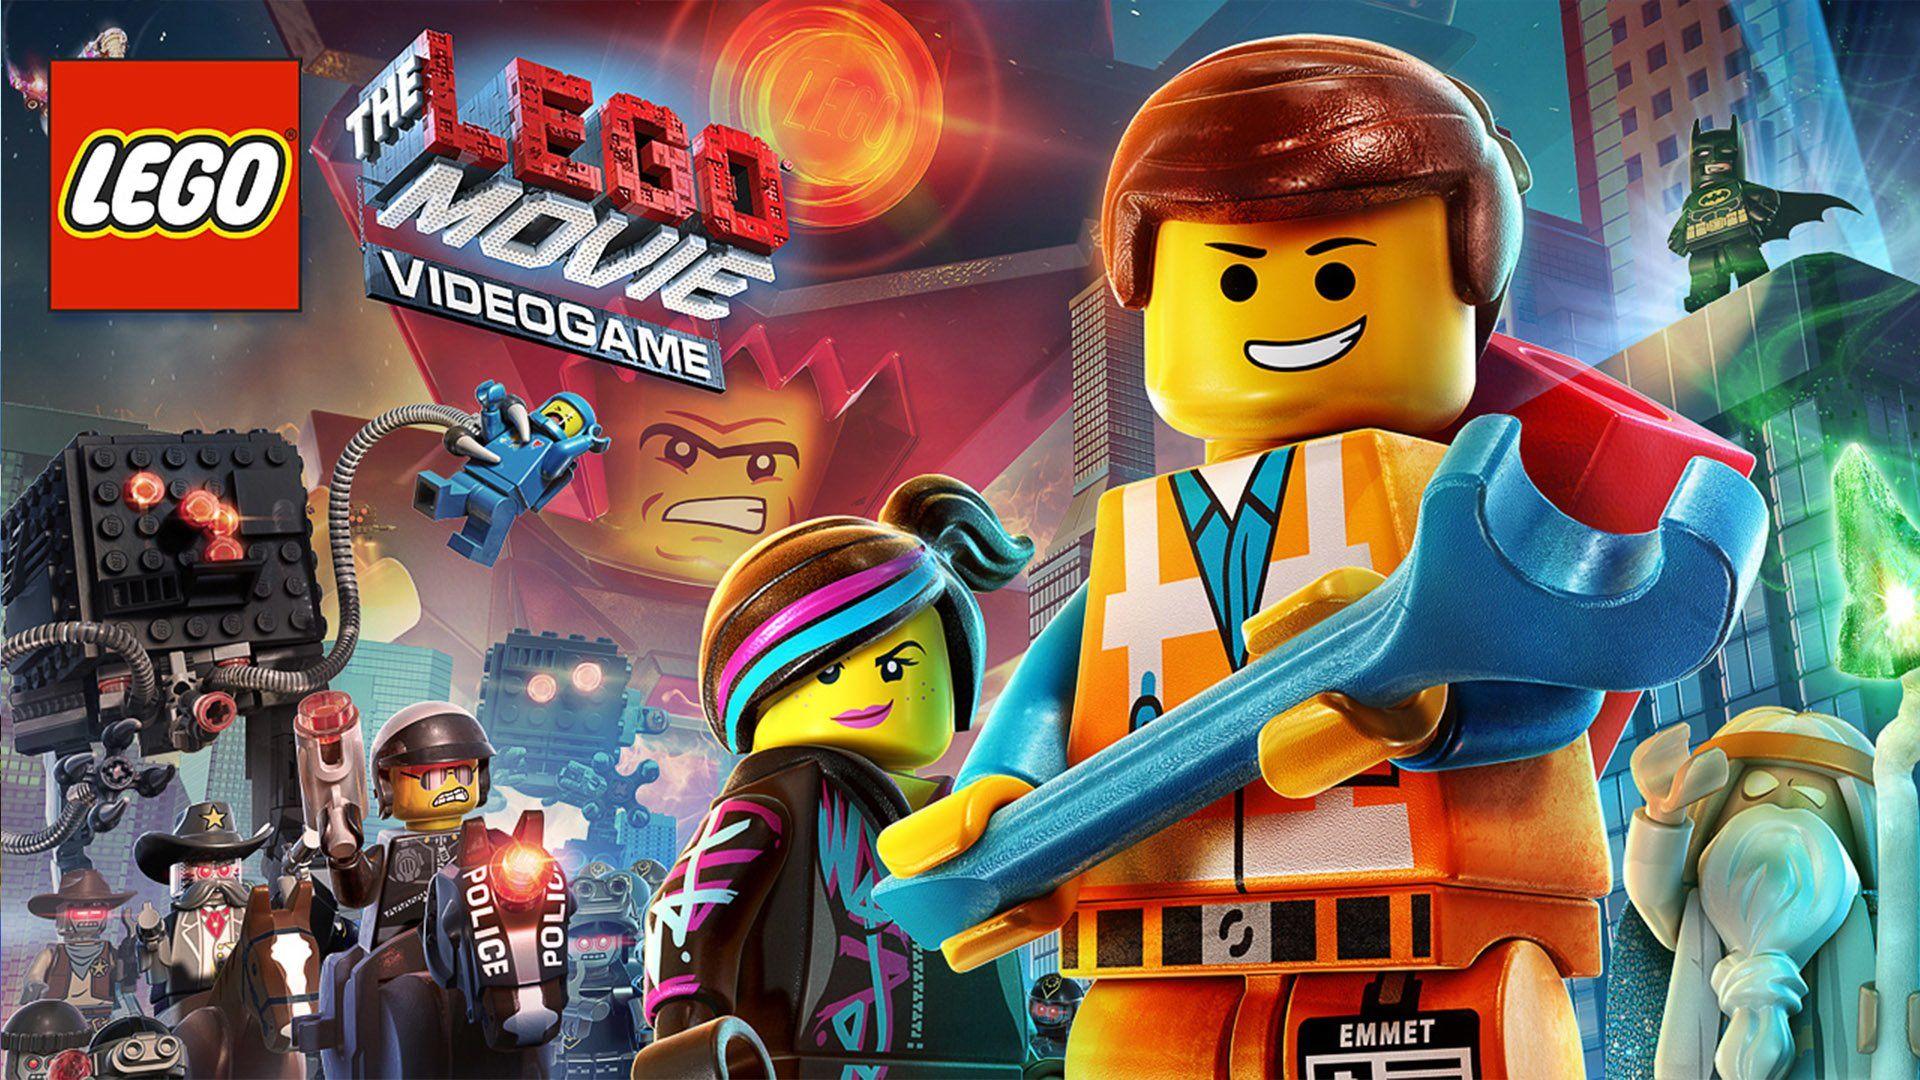 The LEGO Movie Videogame Full HD Wallpaper